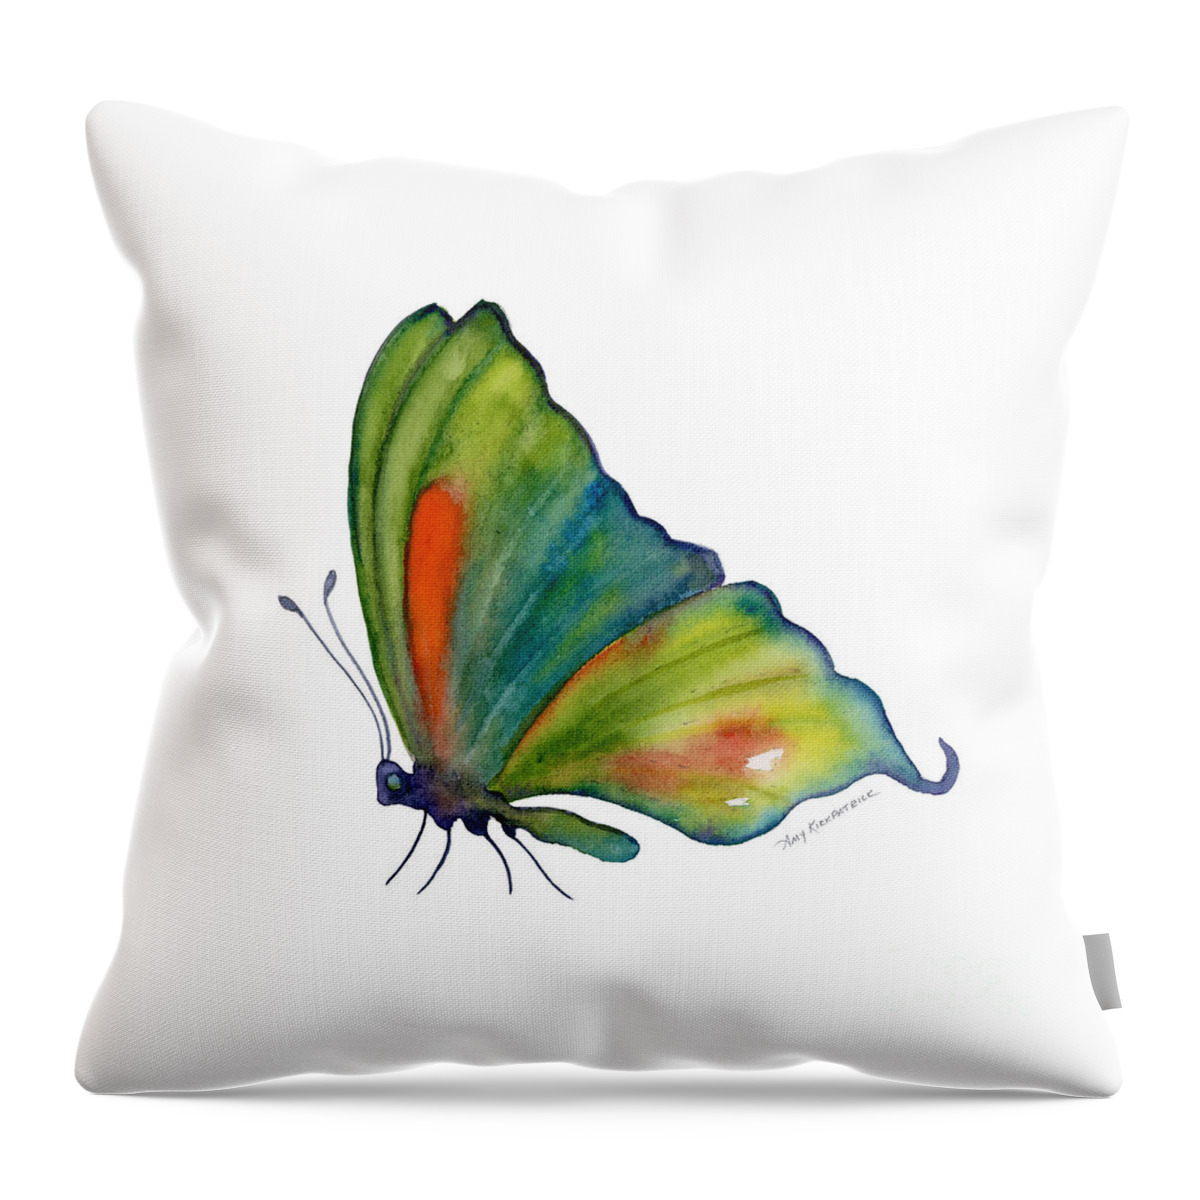 Perched Orange Spot Butterfly Throw Pillow featuring the painting 3 Perched Orange Spot Butterfly by Amy Kirkpatrick